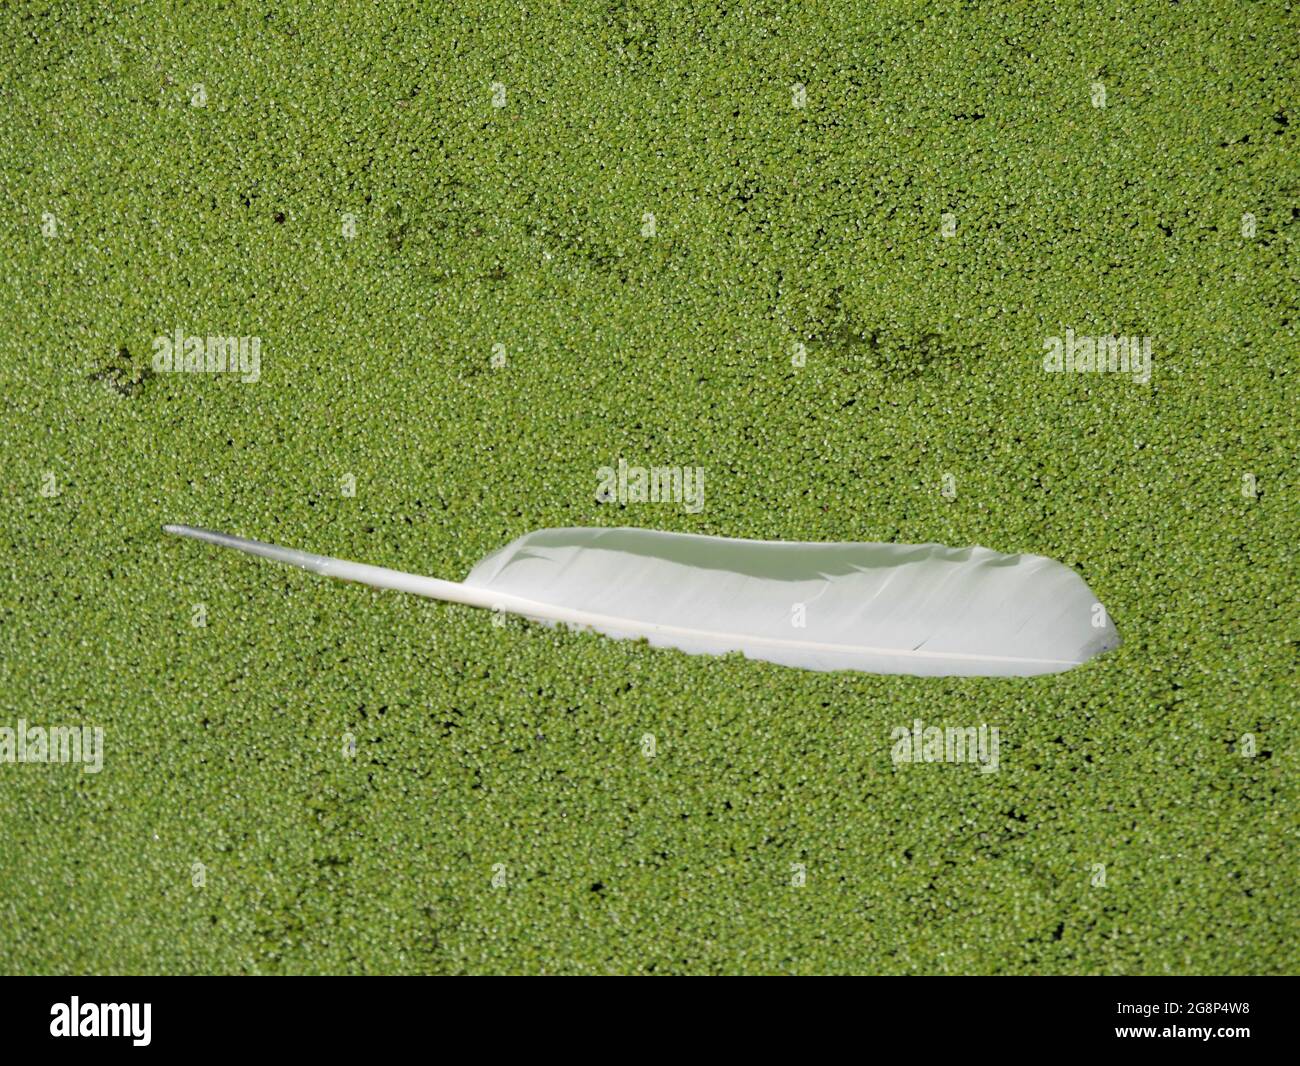 Swan feather floating in duckweed Stock Photo